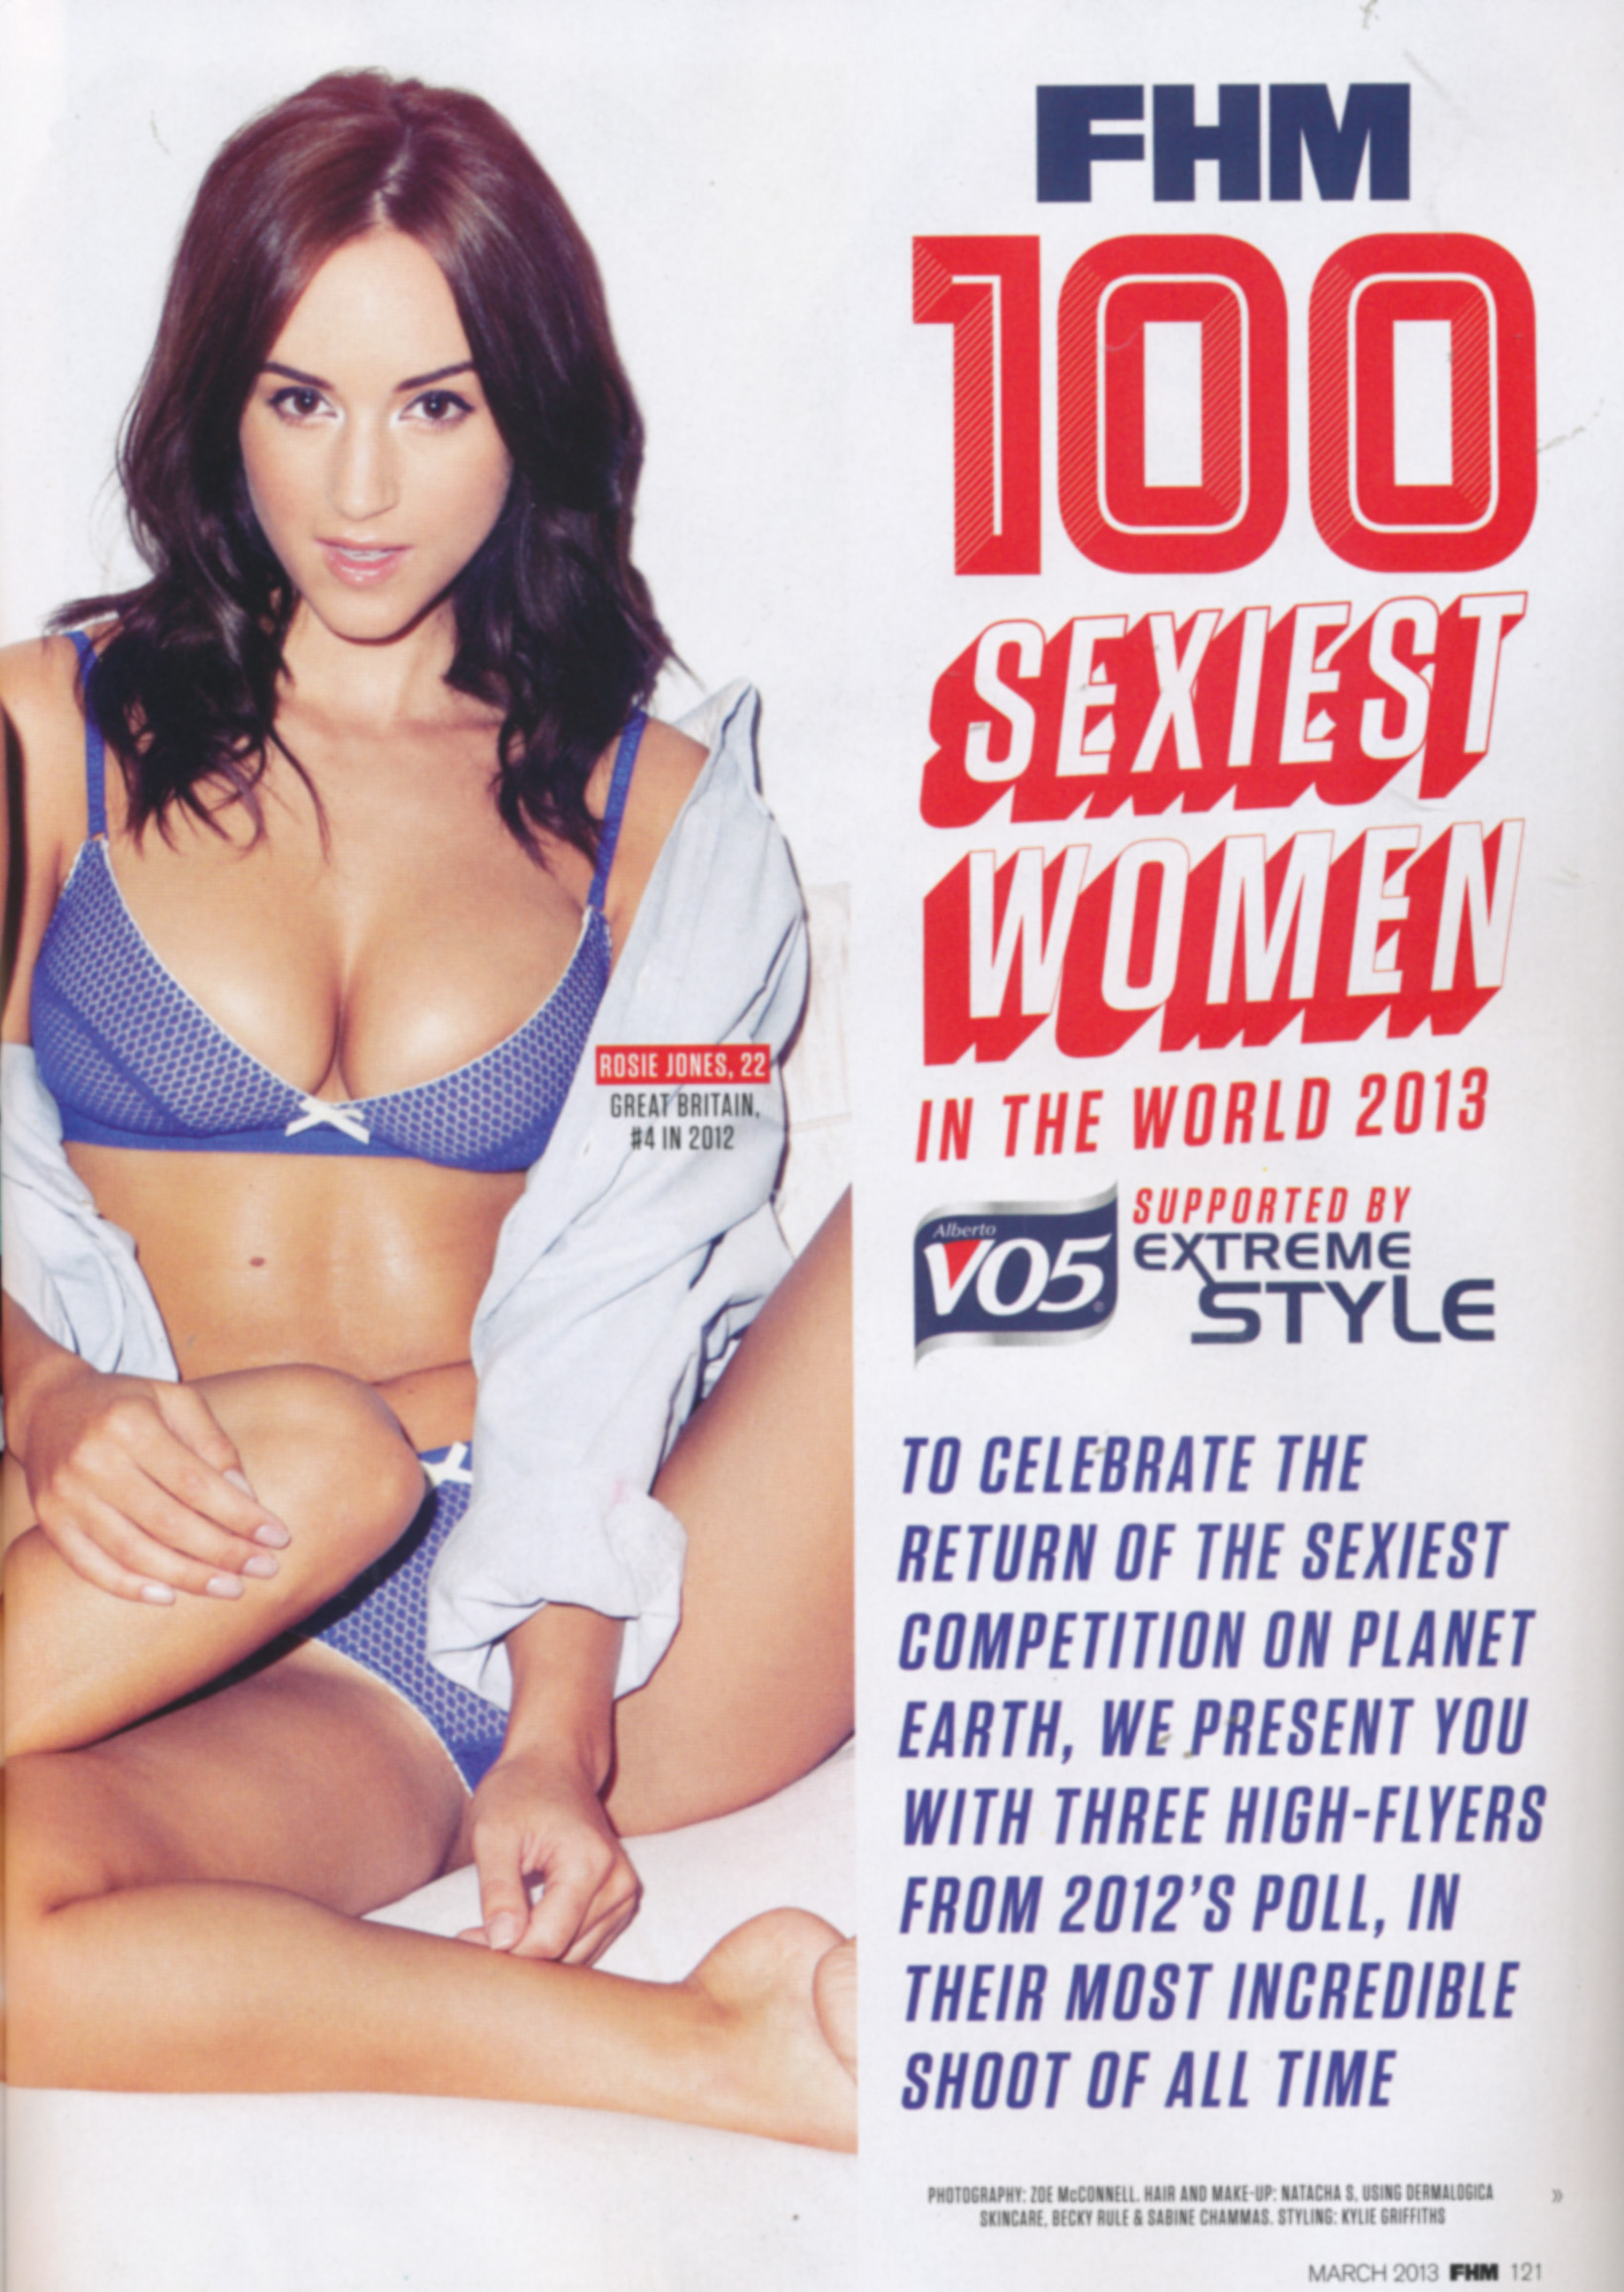 Rosie Jones, and friends for FHM’s 100 Sexiest Women of 2013